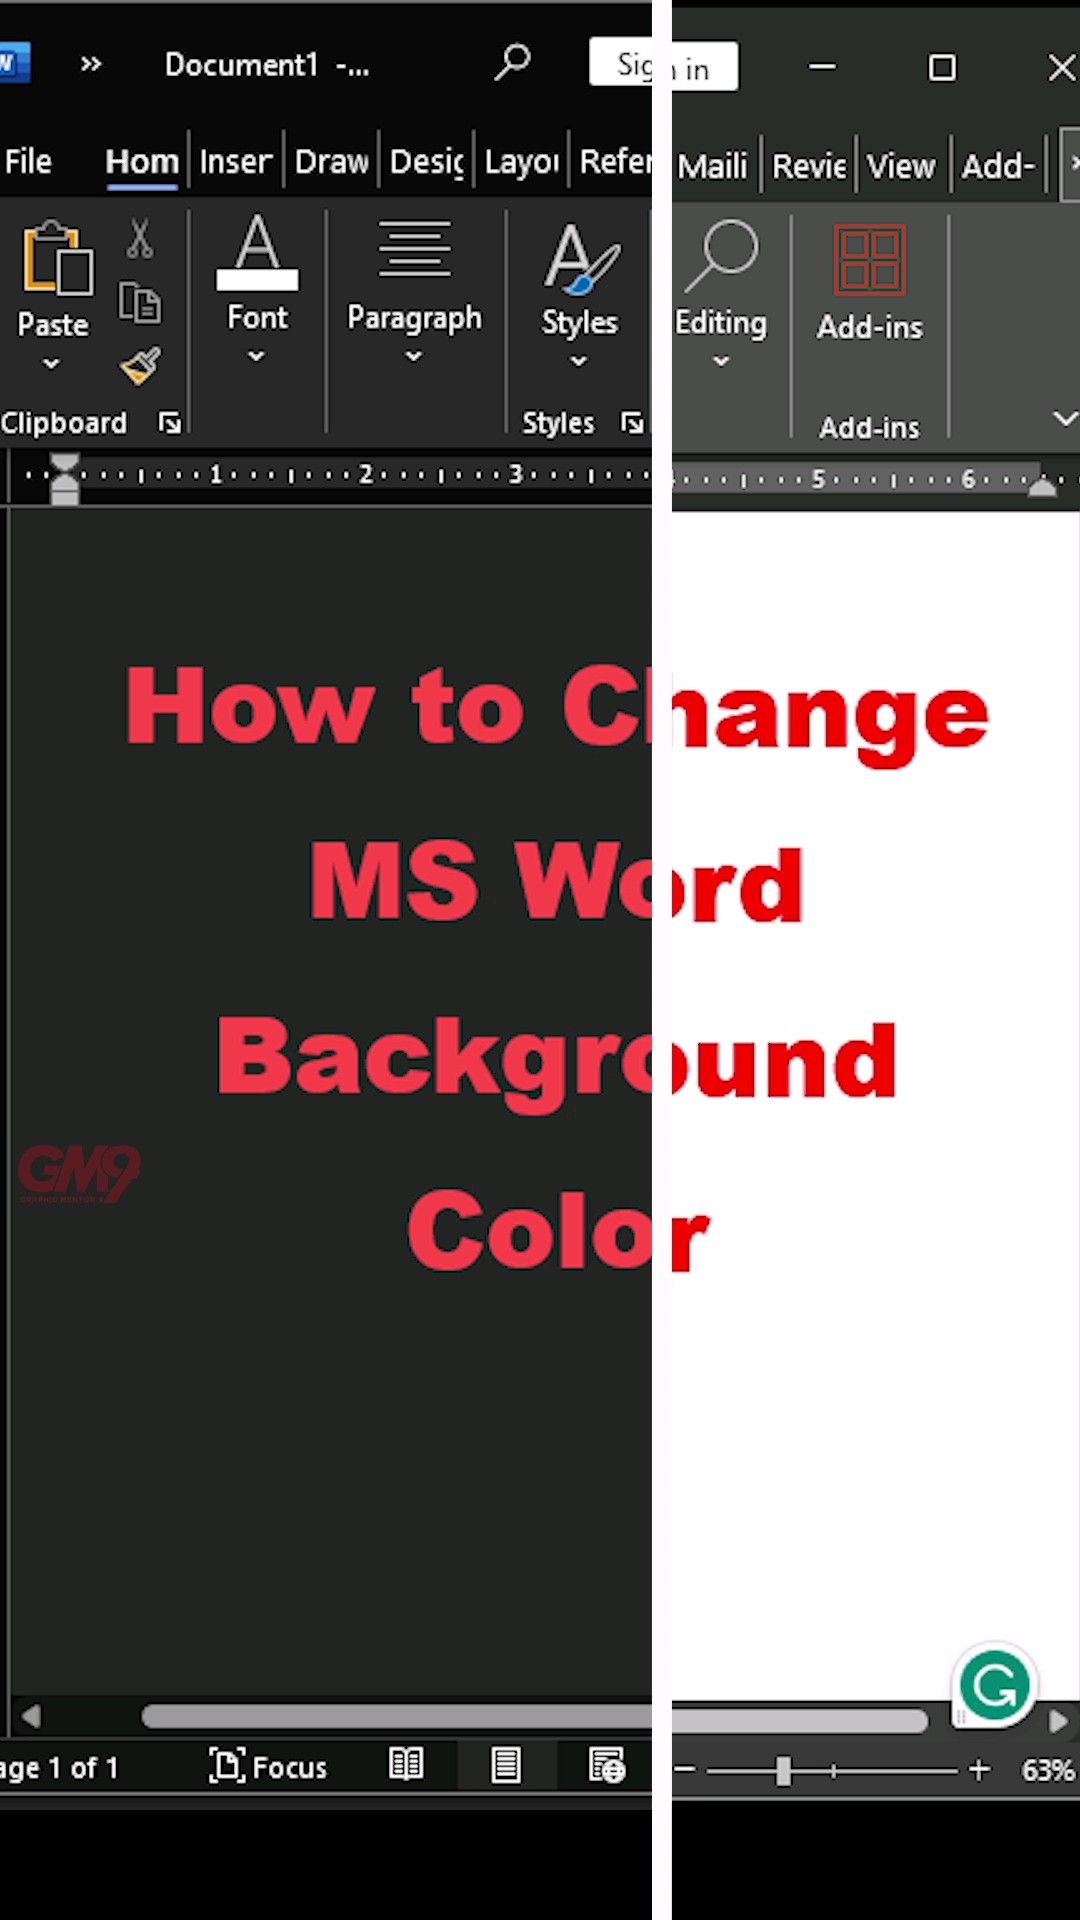 How to Change Background Color of MS Word Chagne Word Dark Mode #msword #mswordthemes #shorts